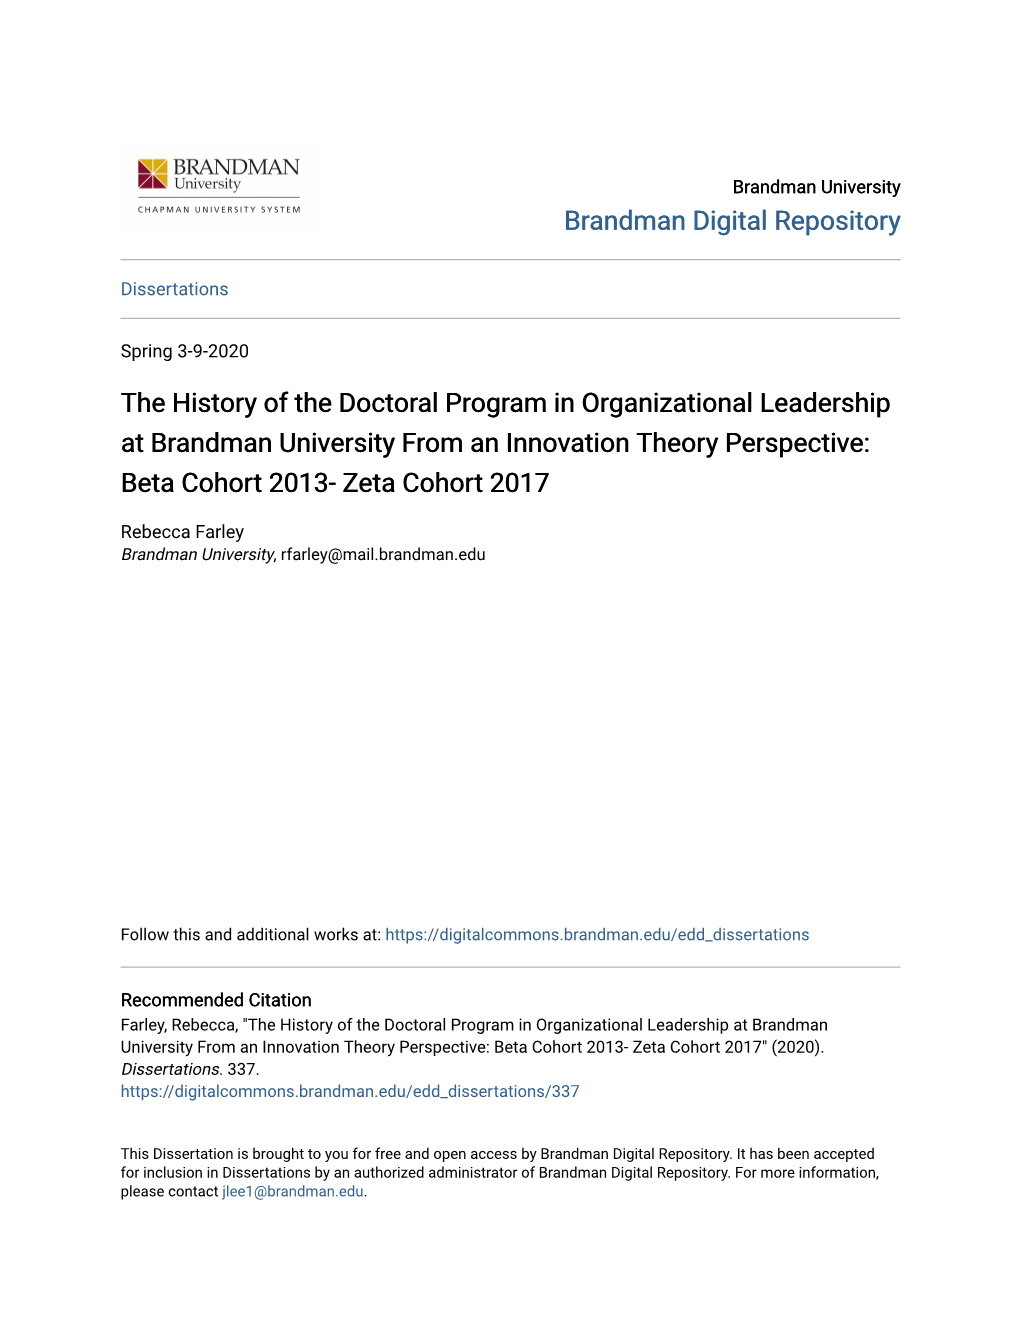 The History of the Doctoral Program in Organizational Leadership at Brandman University from an Innovation Theory Perspective: Beta Cohort 2013- Zeta Cohort 2017